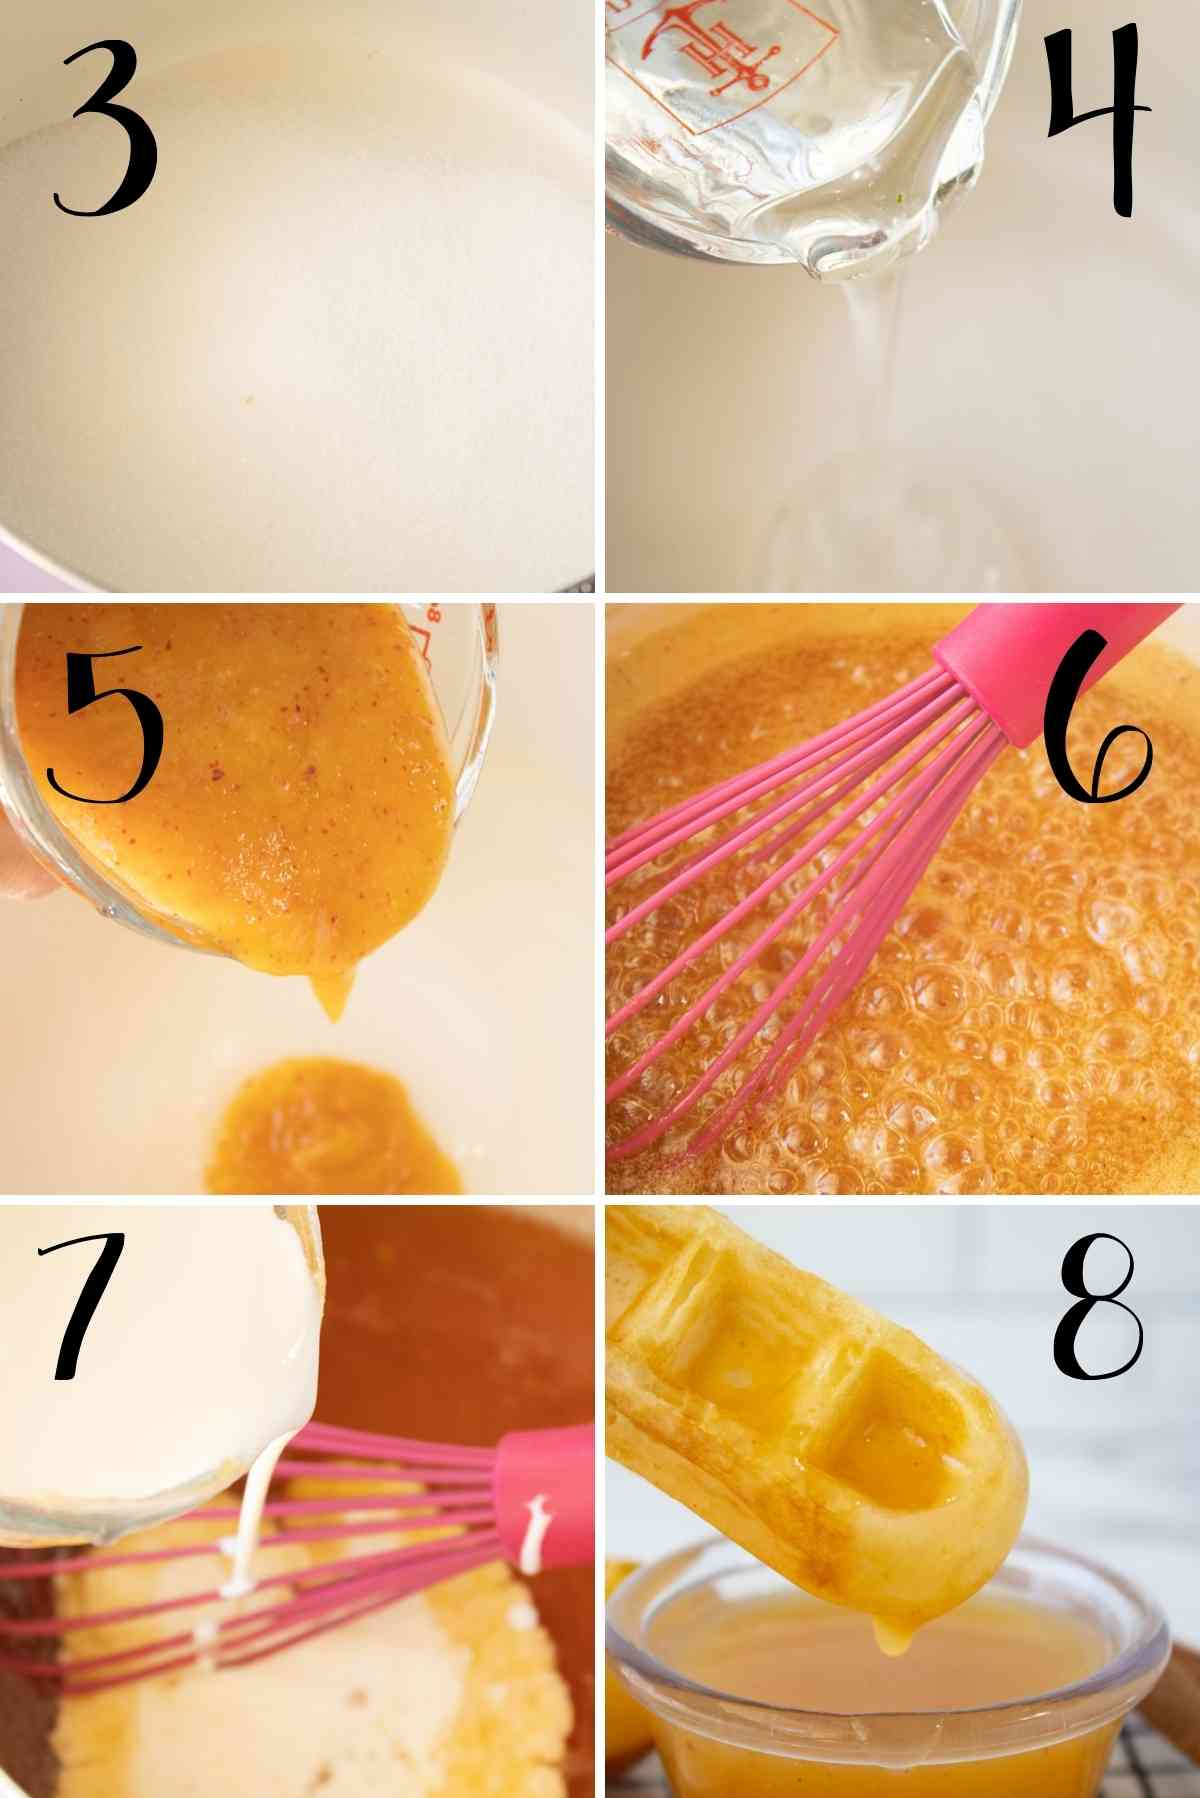 How to make peach syrup step by step.